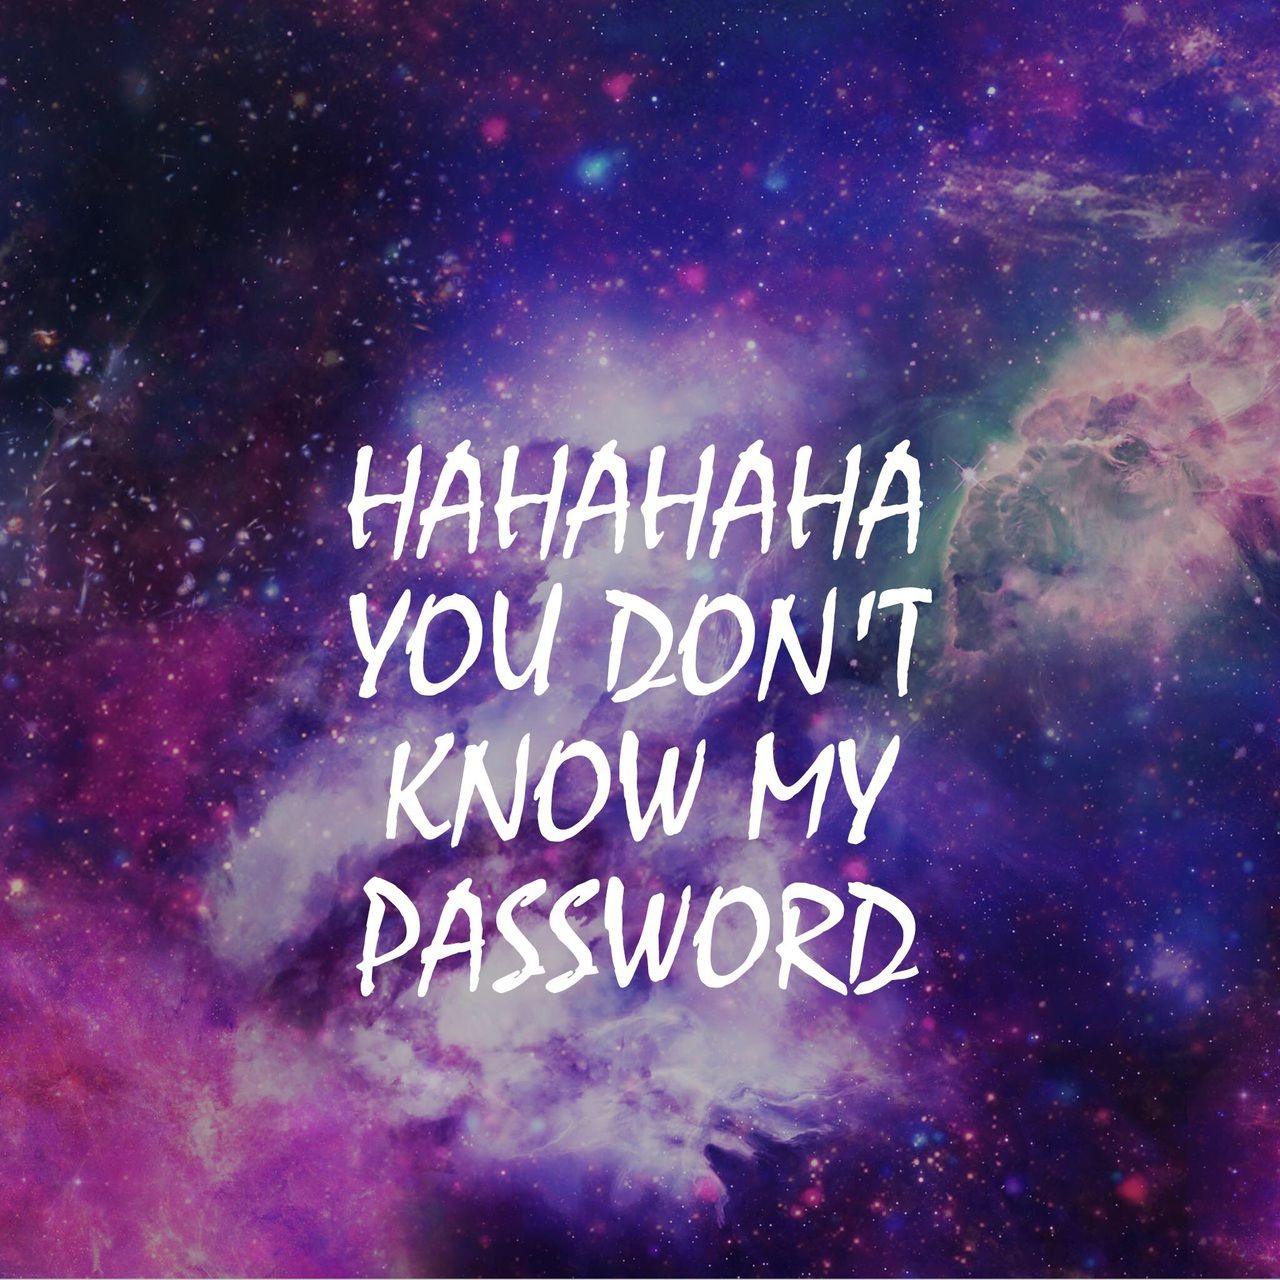 You Don't know my Password